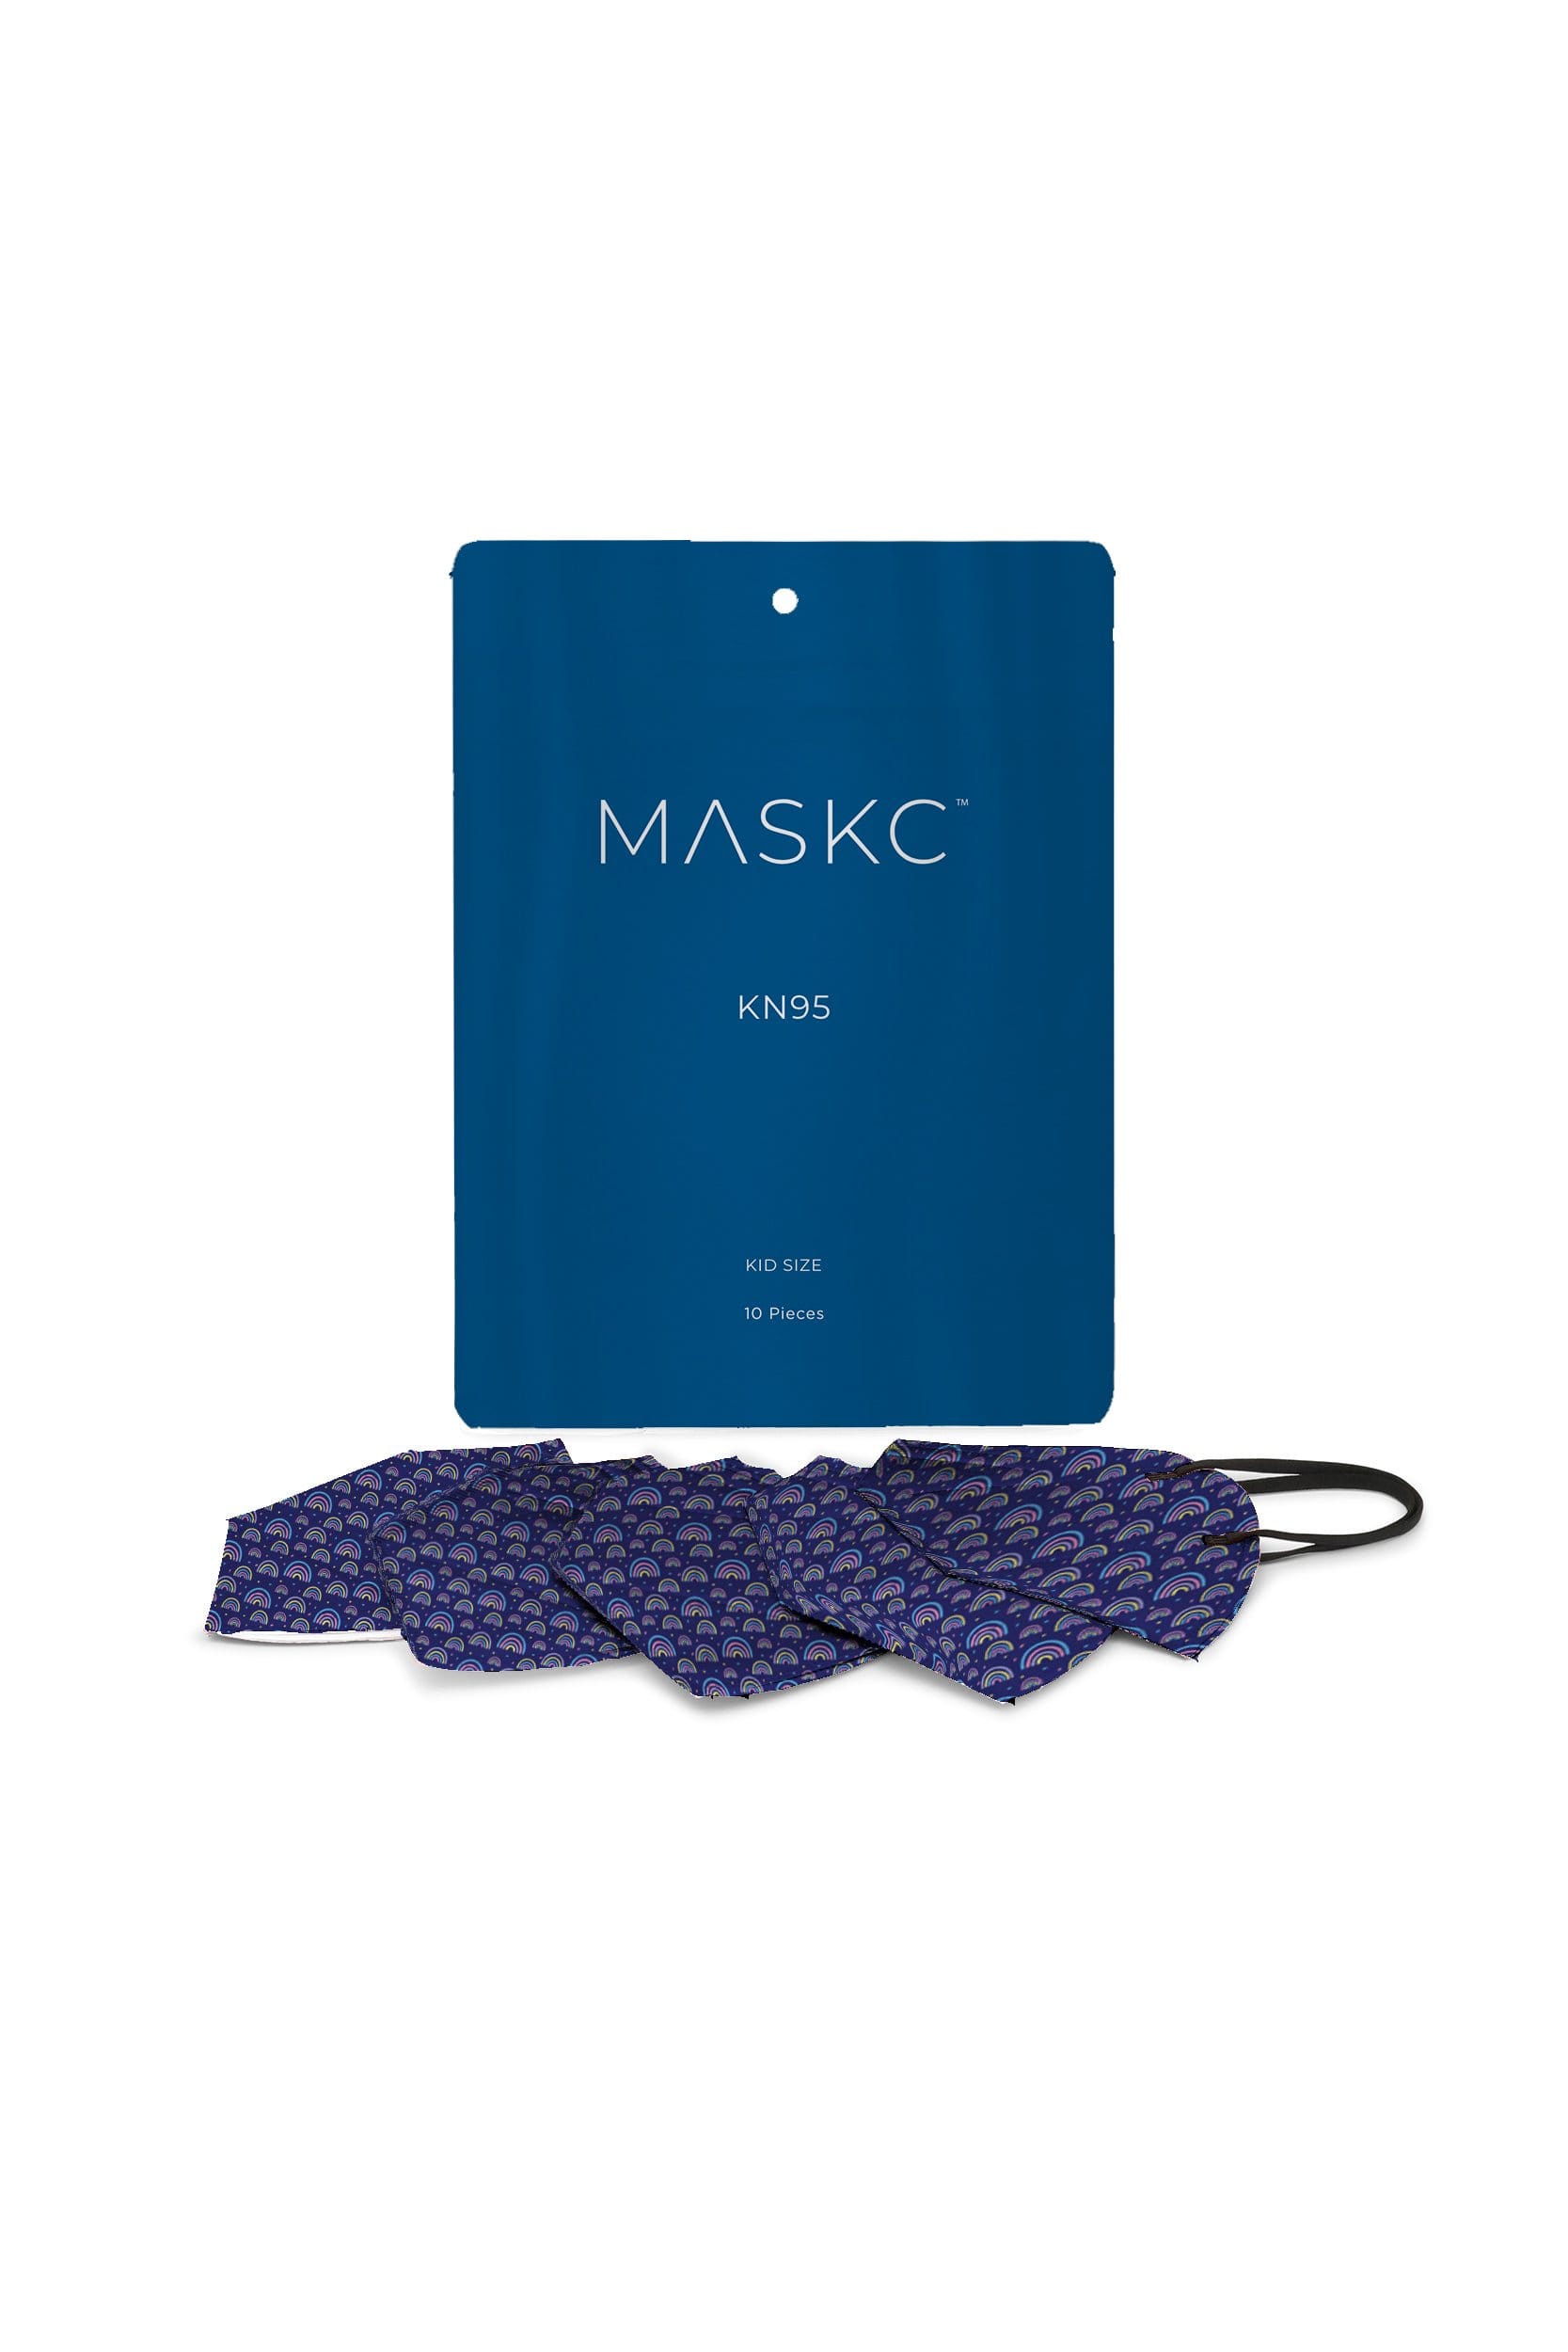 Pack of Kids Blue Rainbow KN95 face masks. Each pack contains stylish high quality face masks. 